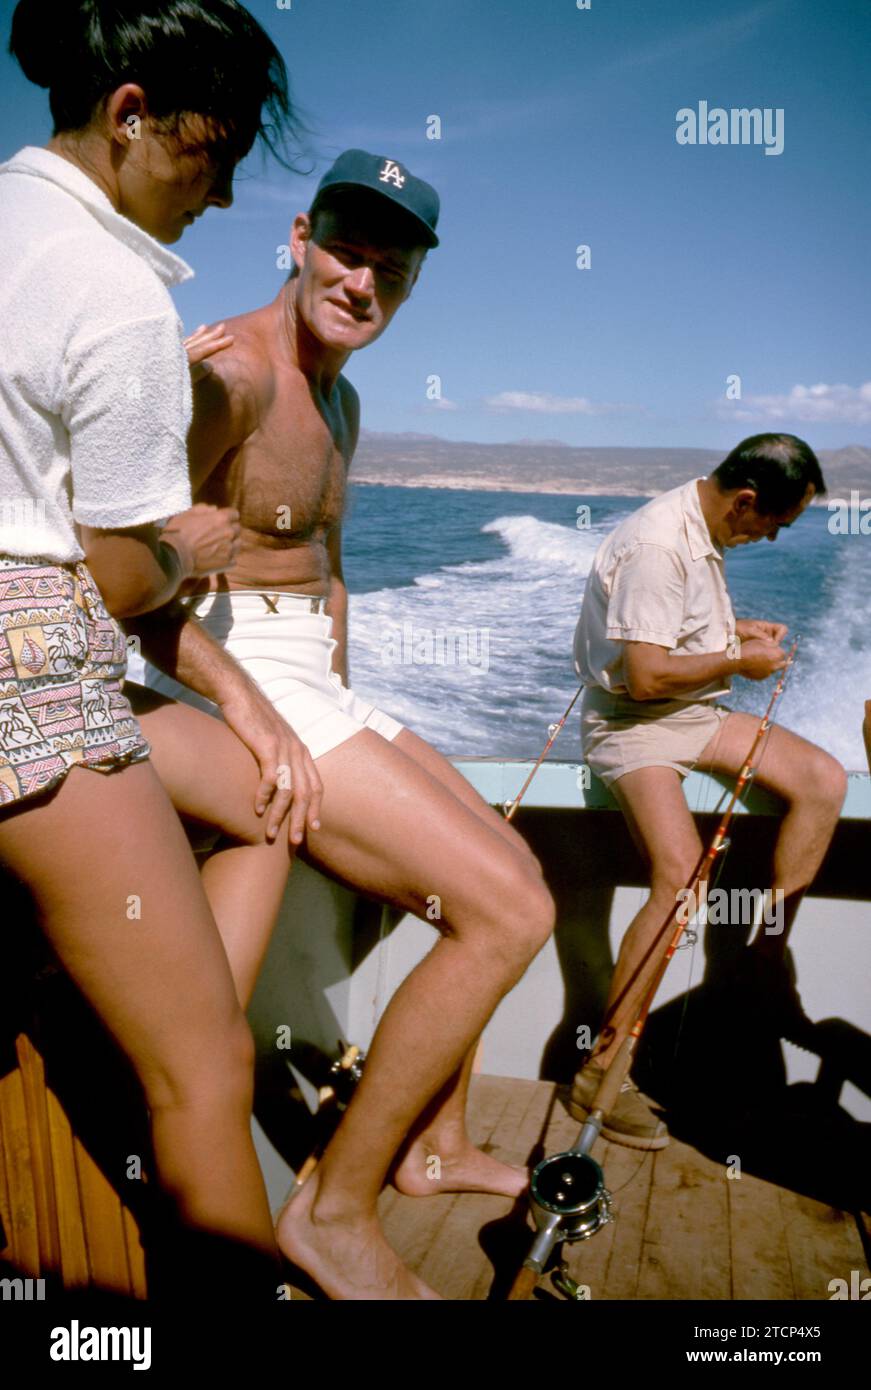 BAJA CALIFORNIA, MEXICO - JUNE, 1962:  Actor and former baseball player Chuck Connors (1921-1992) and actress fiance Kamala Devi (1934-2010) relax on a boat during a fishing trip circa June, 1962 in Baja California, Mexico.  (Photo by Hy Peskin) *** Local Caption *** Kamala Devi;Chuck Connors Stock Photo